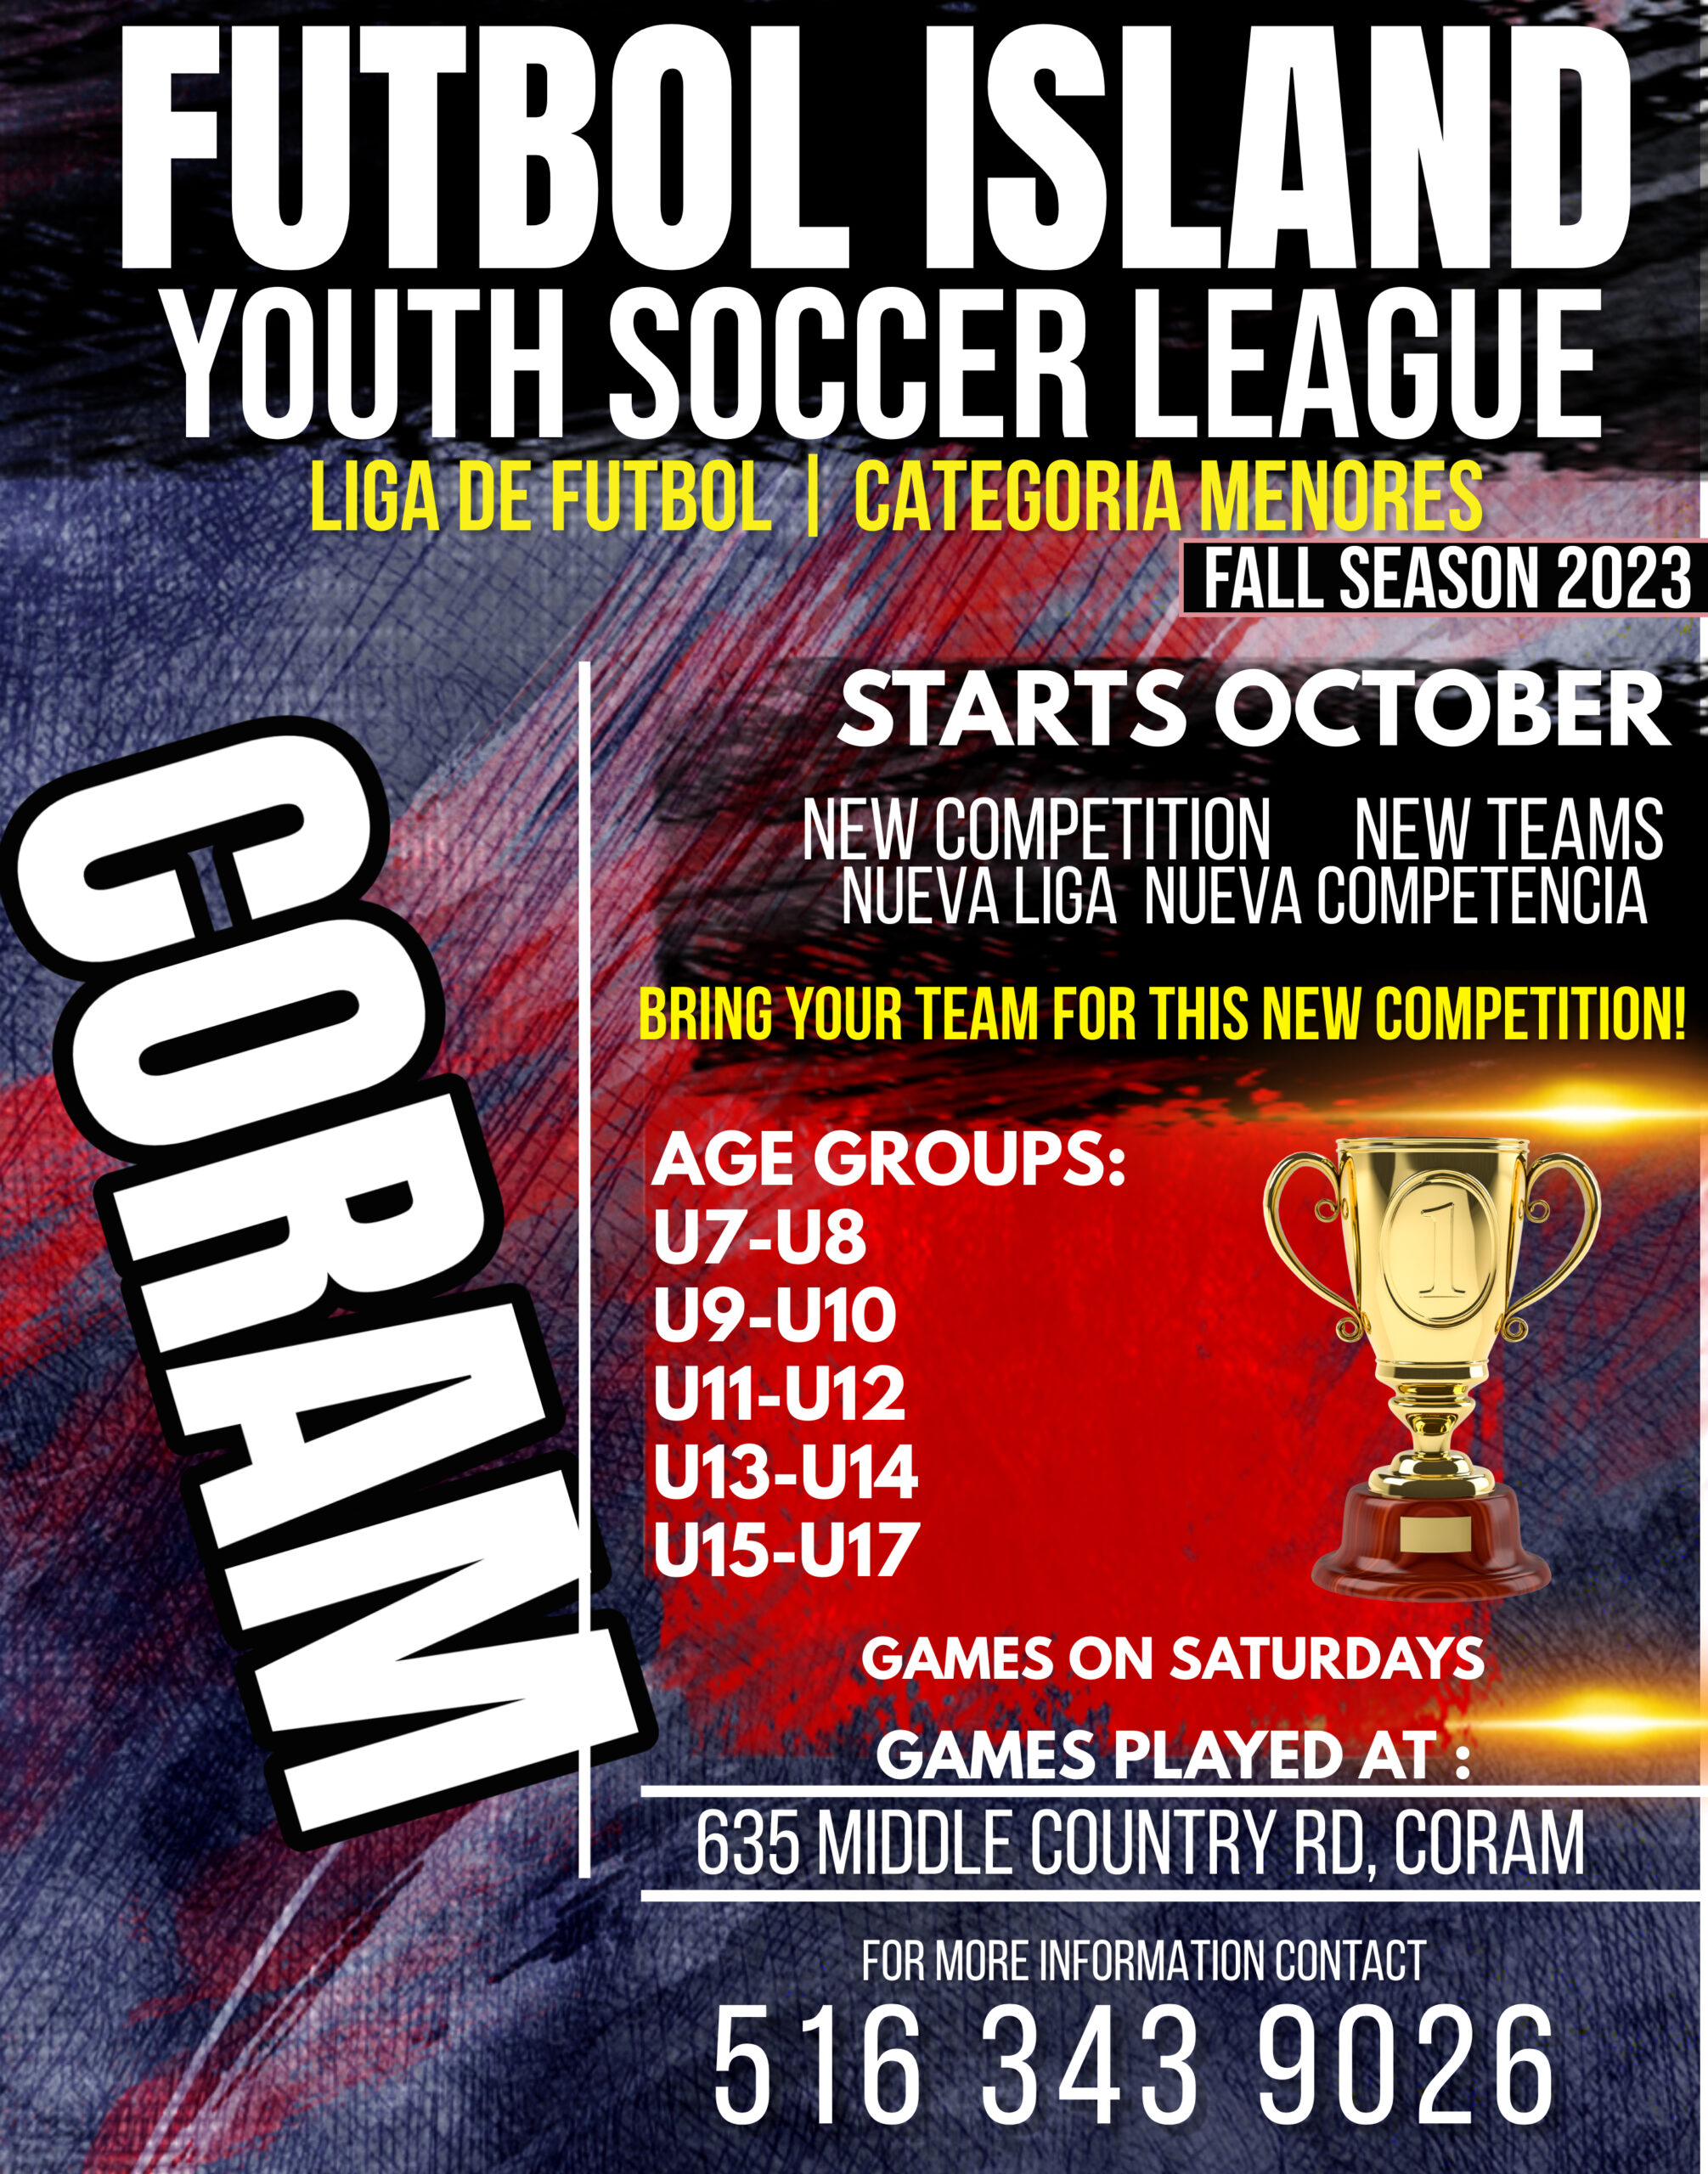 CORAM YOUTH LEAGUE